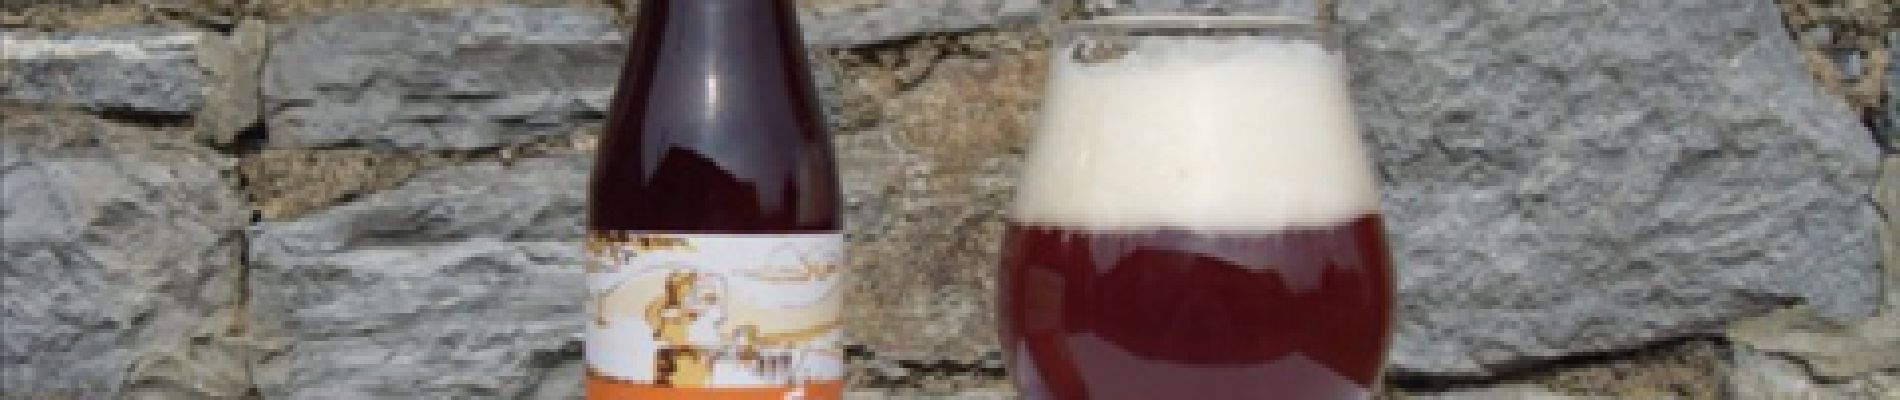 POI Rochefort - Our tip : the Lesse Brewery - Photo